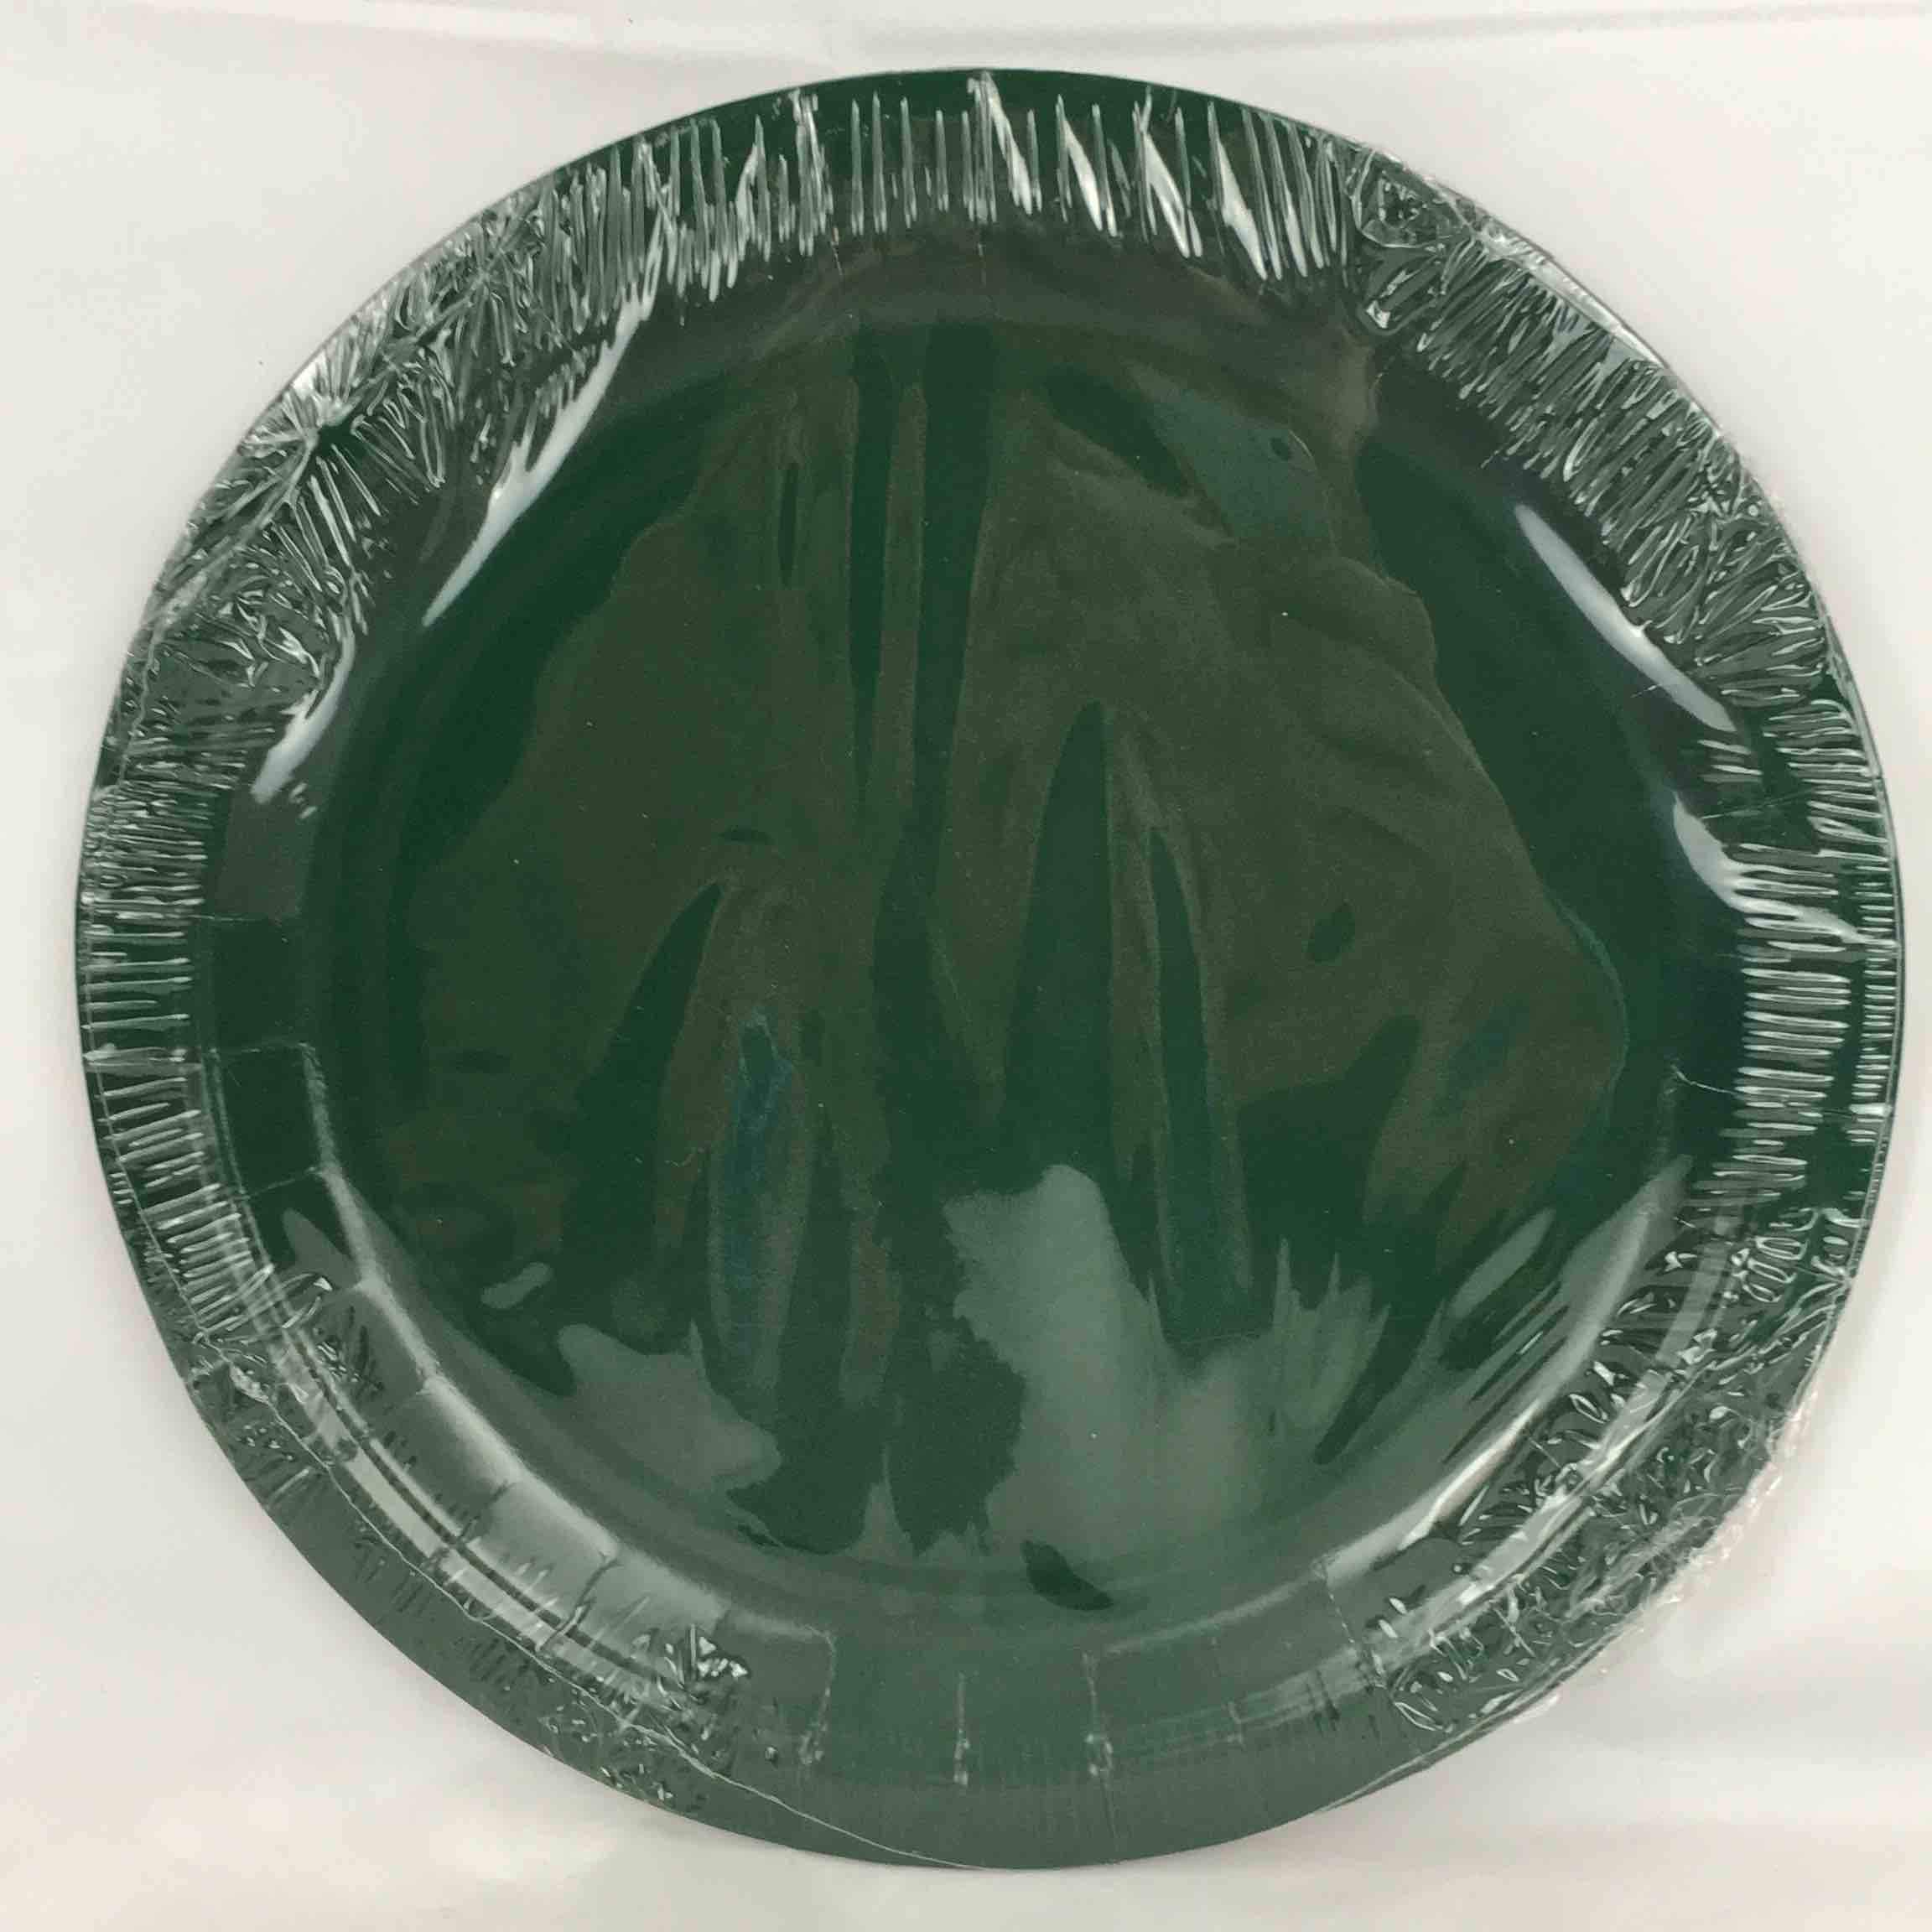 SOLID HUNT GREEN PLATES 9in  8pcs